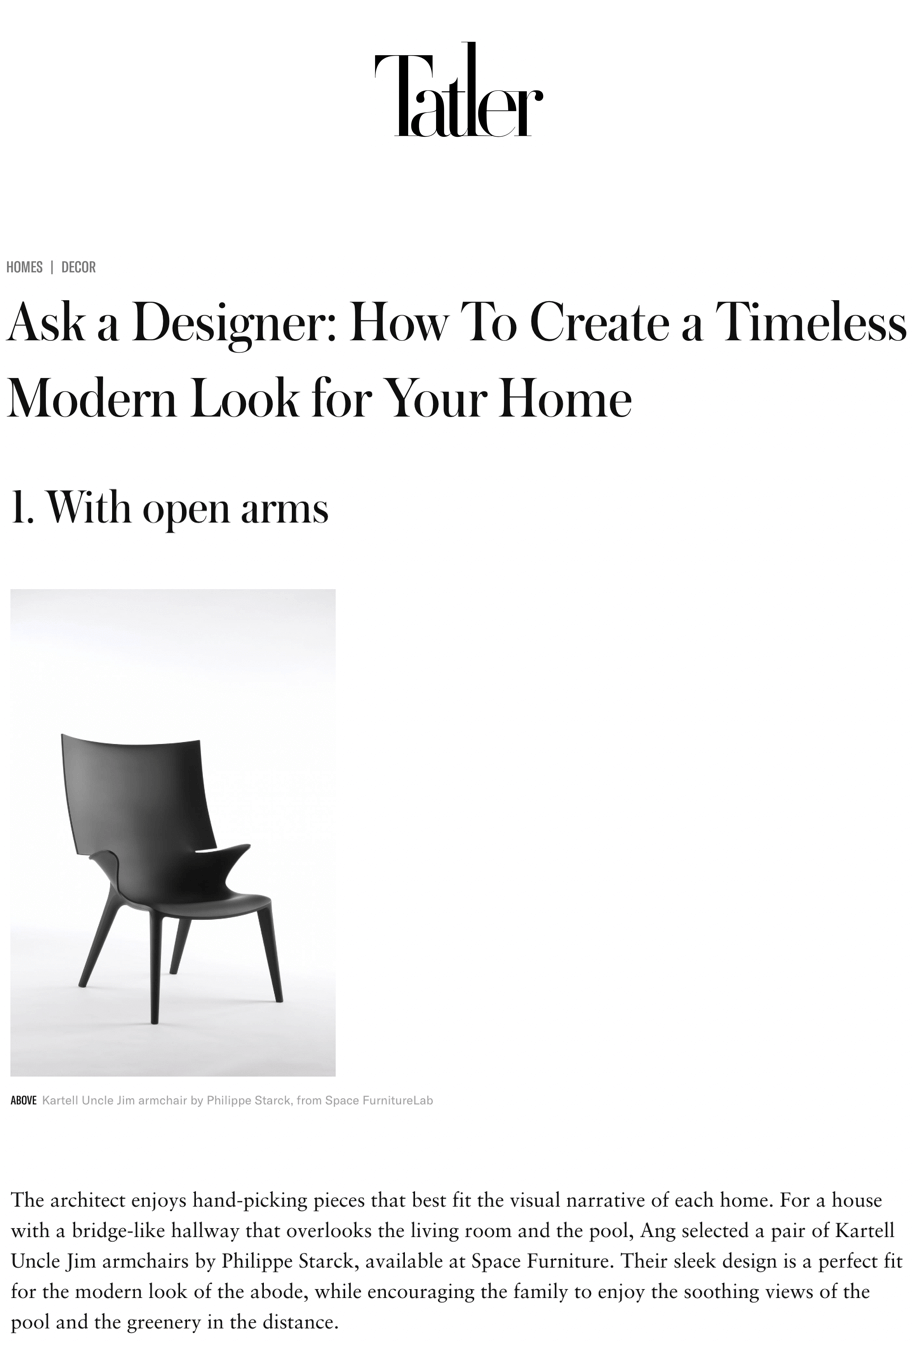 Ask a Designer: How To Create a Timeless Modern Look for Your Home